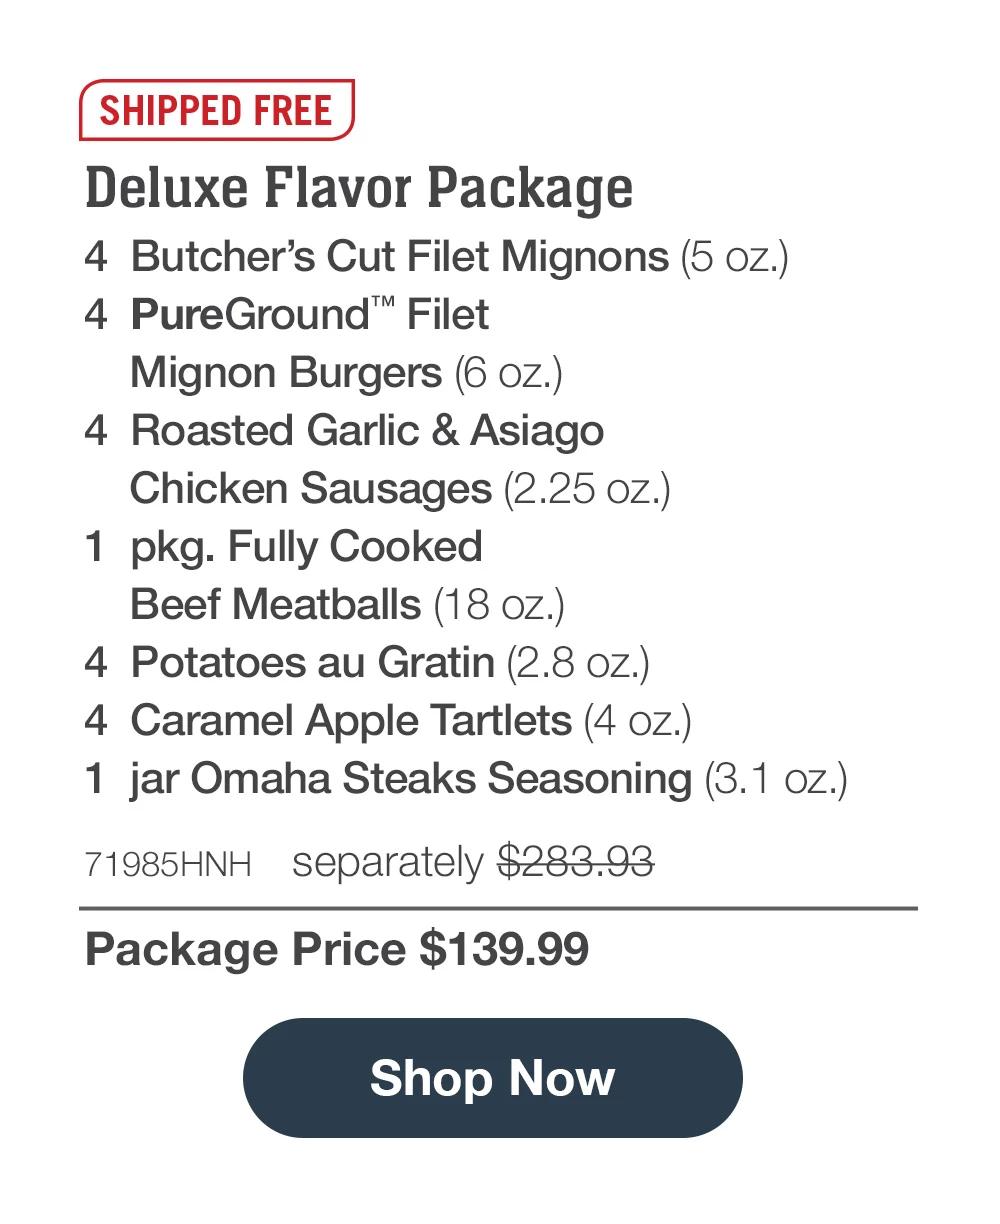 SHIPPED FREE | Deluxe Flavor Package - 4  Butcher's Cut Filet Mignons (5 oz.) - 4  PureGround™ Filet Mignon Burgers (6 oz.) - 4  Roasted Garlic & Asiago Chicken Sausages (2.25 oz.) - 1  pkg. Fully Cooked Beef Meatballs (18 oz.) - 4  Potatoes au Gratin (2.8 oz.) - 4  Caramel Apple Tartlets (4 oz.) - 1  jar Omaha Steaks Seasoning (3.1 oz.) - 71985HNH separately $283.93 | Package Price $139.99 || Shop Now